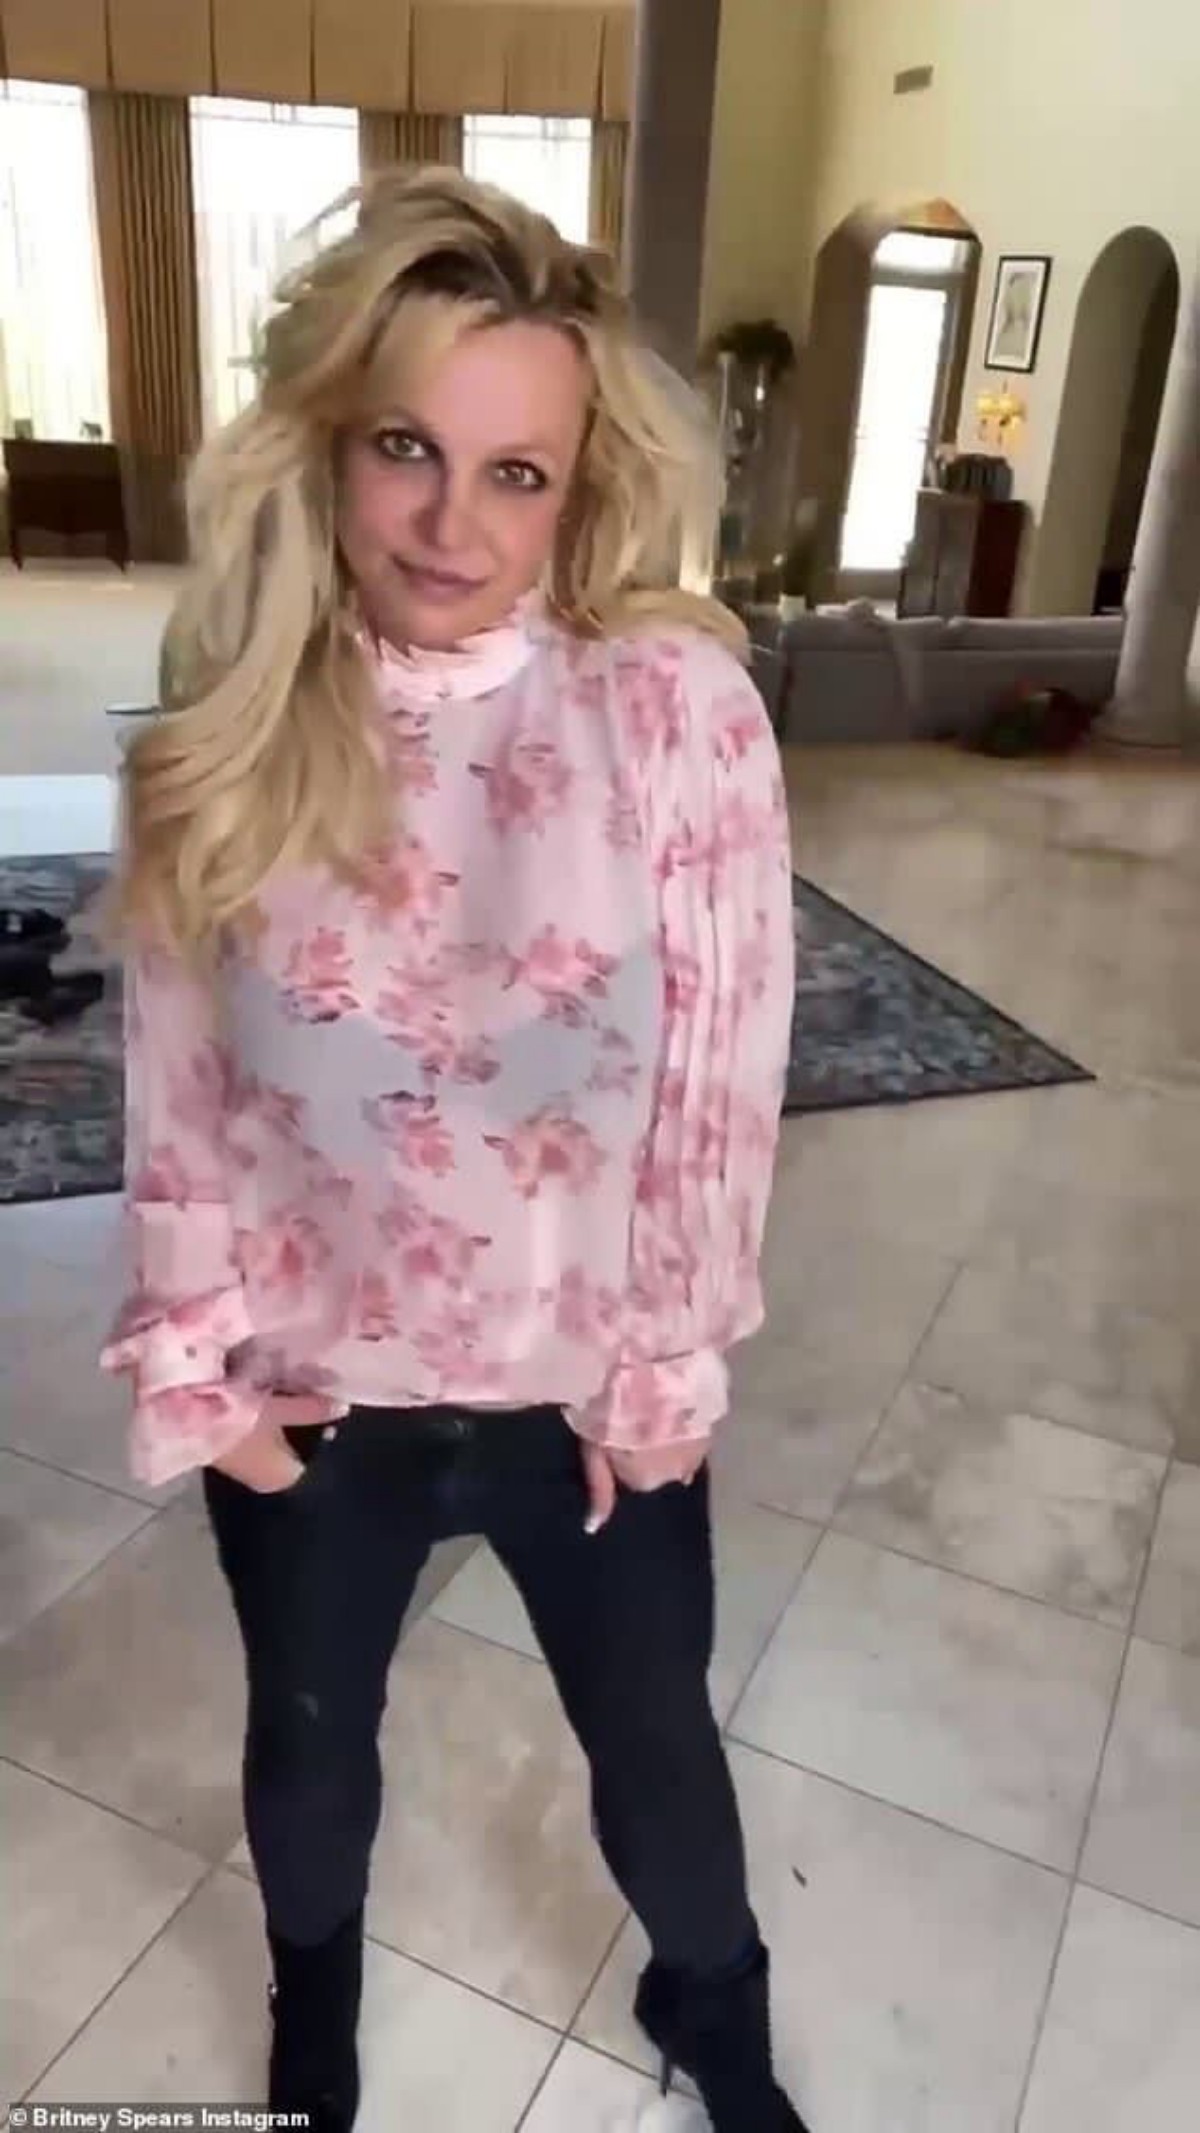 Britney Spears Returns To Instagram With Pregnant Video